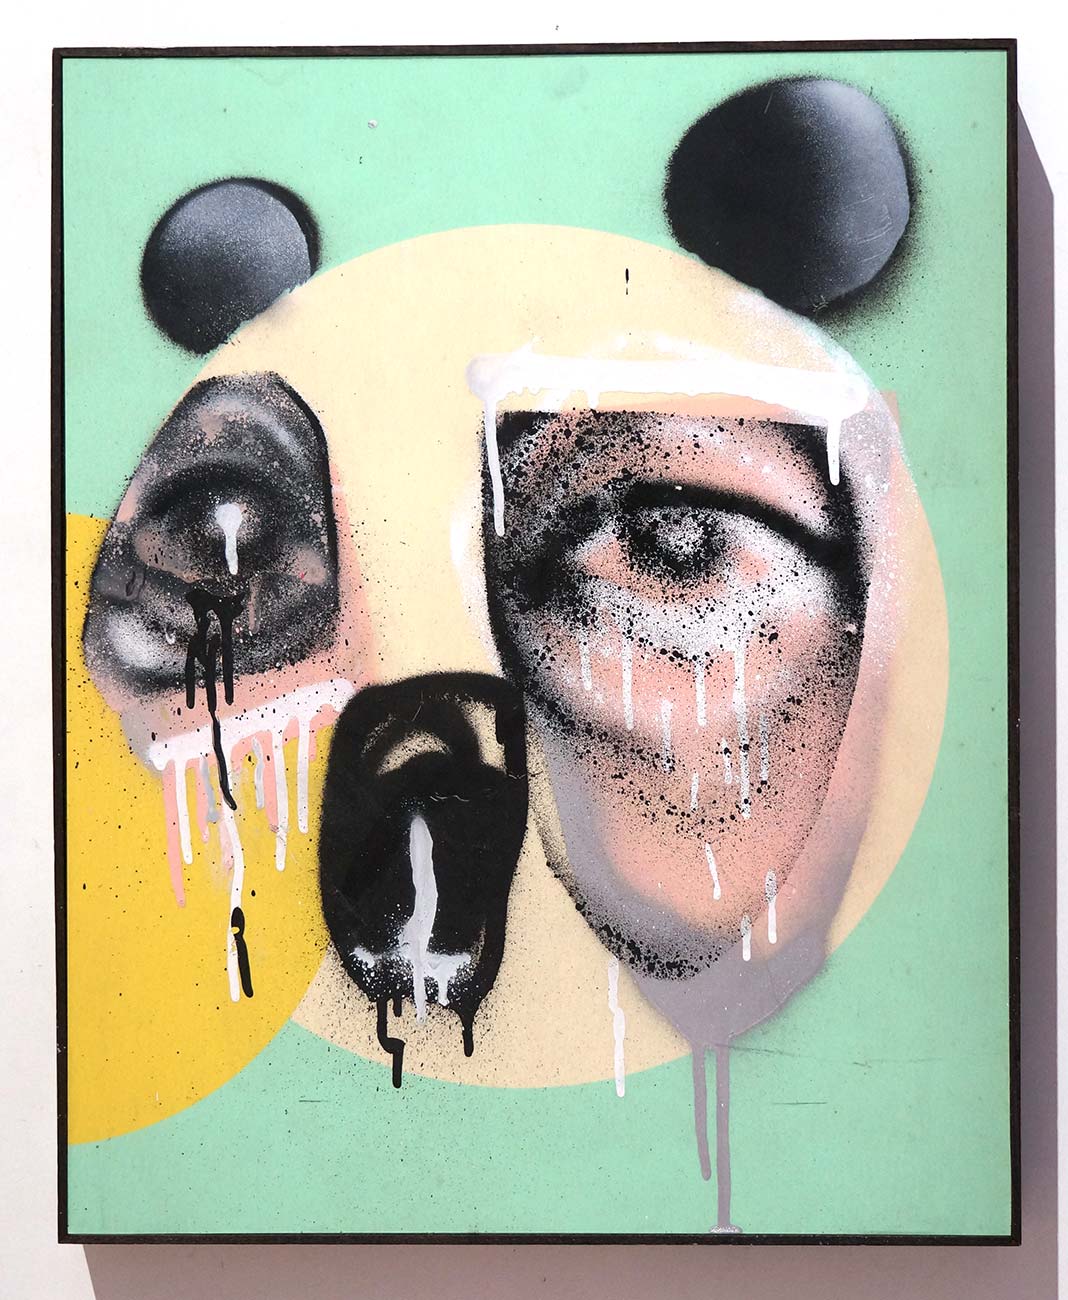 So4Melone: "Pink Panda"  - signed on the backside, May 2020 - 51 cm x 41 cm x 4,5 cm  - salzigberlin